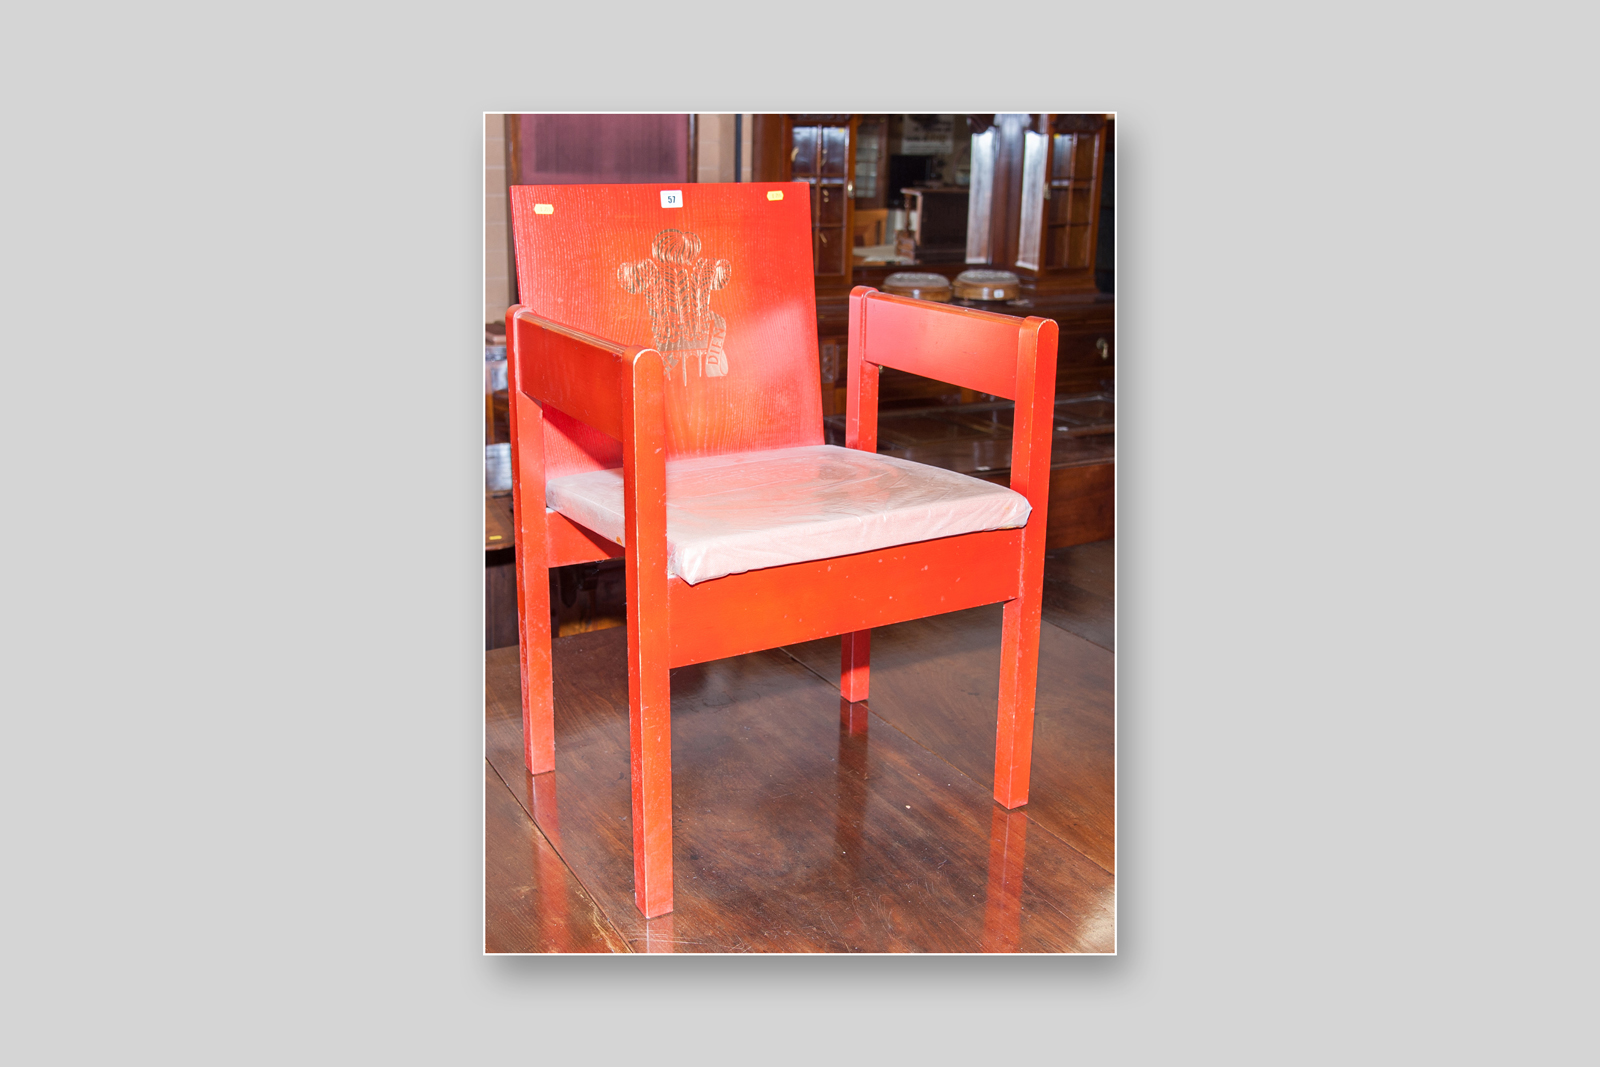 An Investiture chair designed by Anthony Armstrong Jones, Earl of Snowdon, Carl Toms and John Pound,